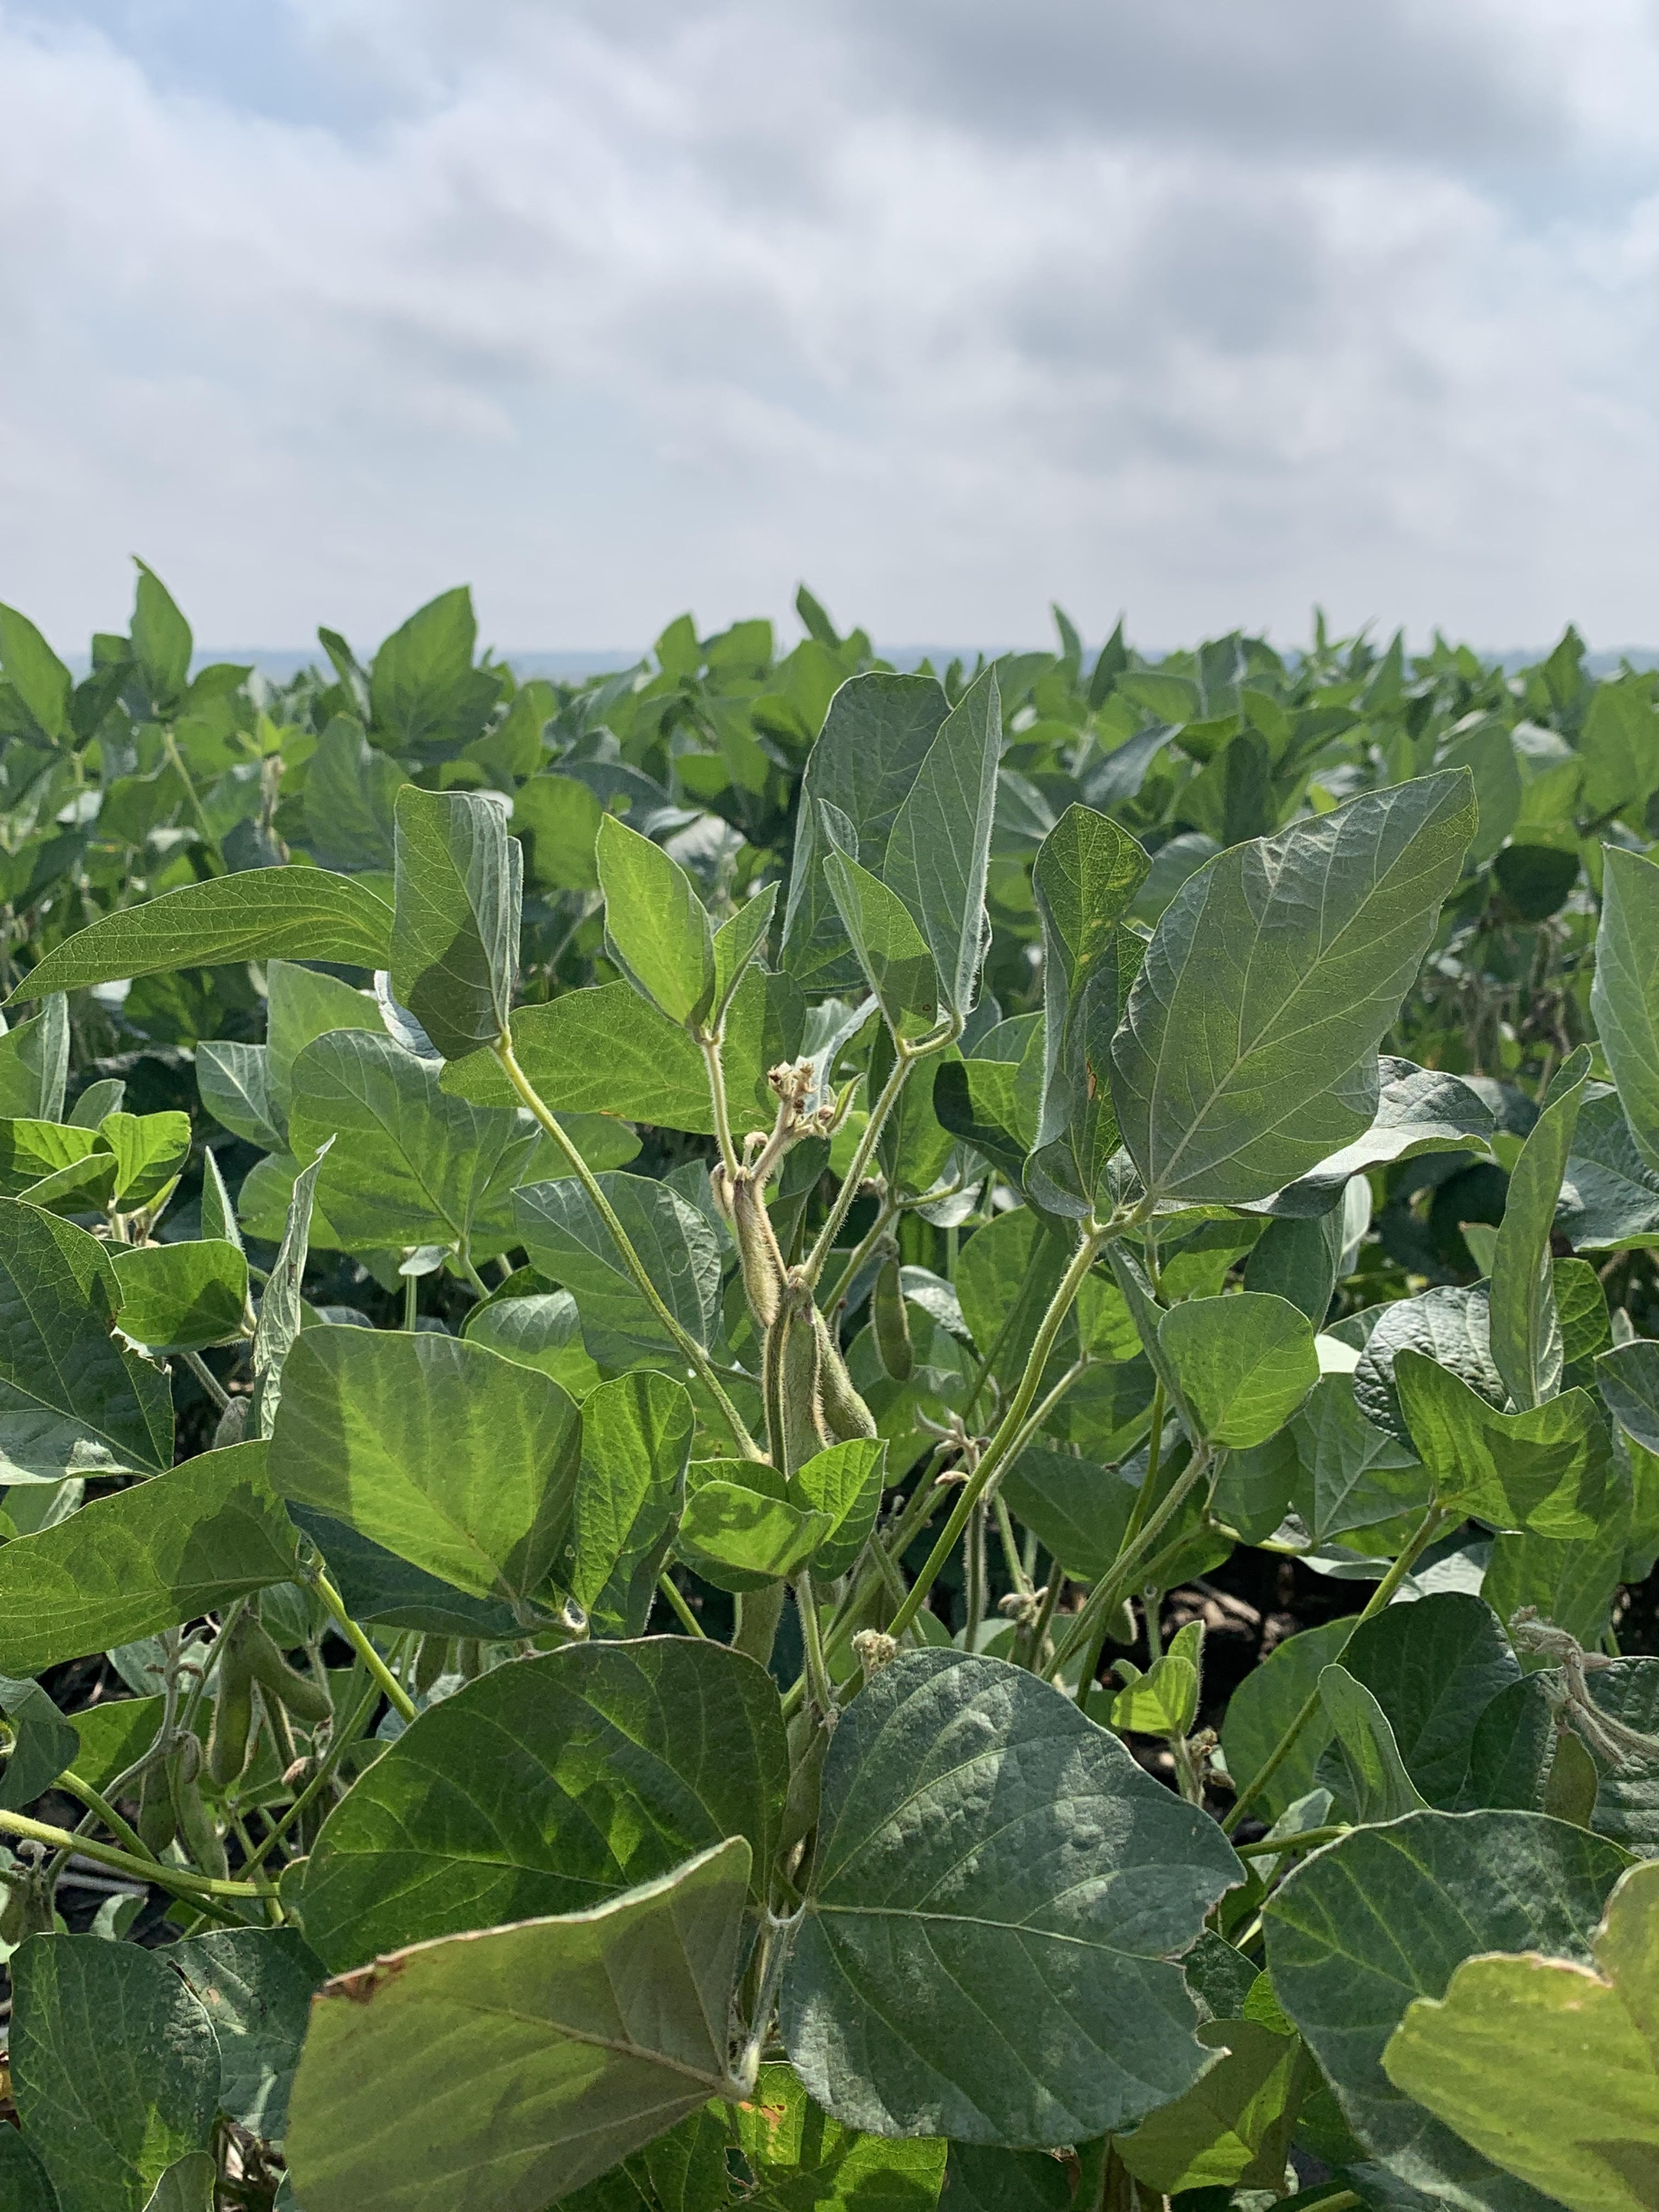 Mid-morning Ag News, August 31, 2021: Cropland and pasture cash rents on the rise in Minnesota